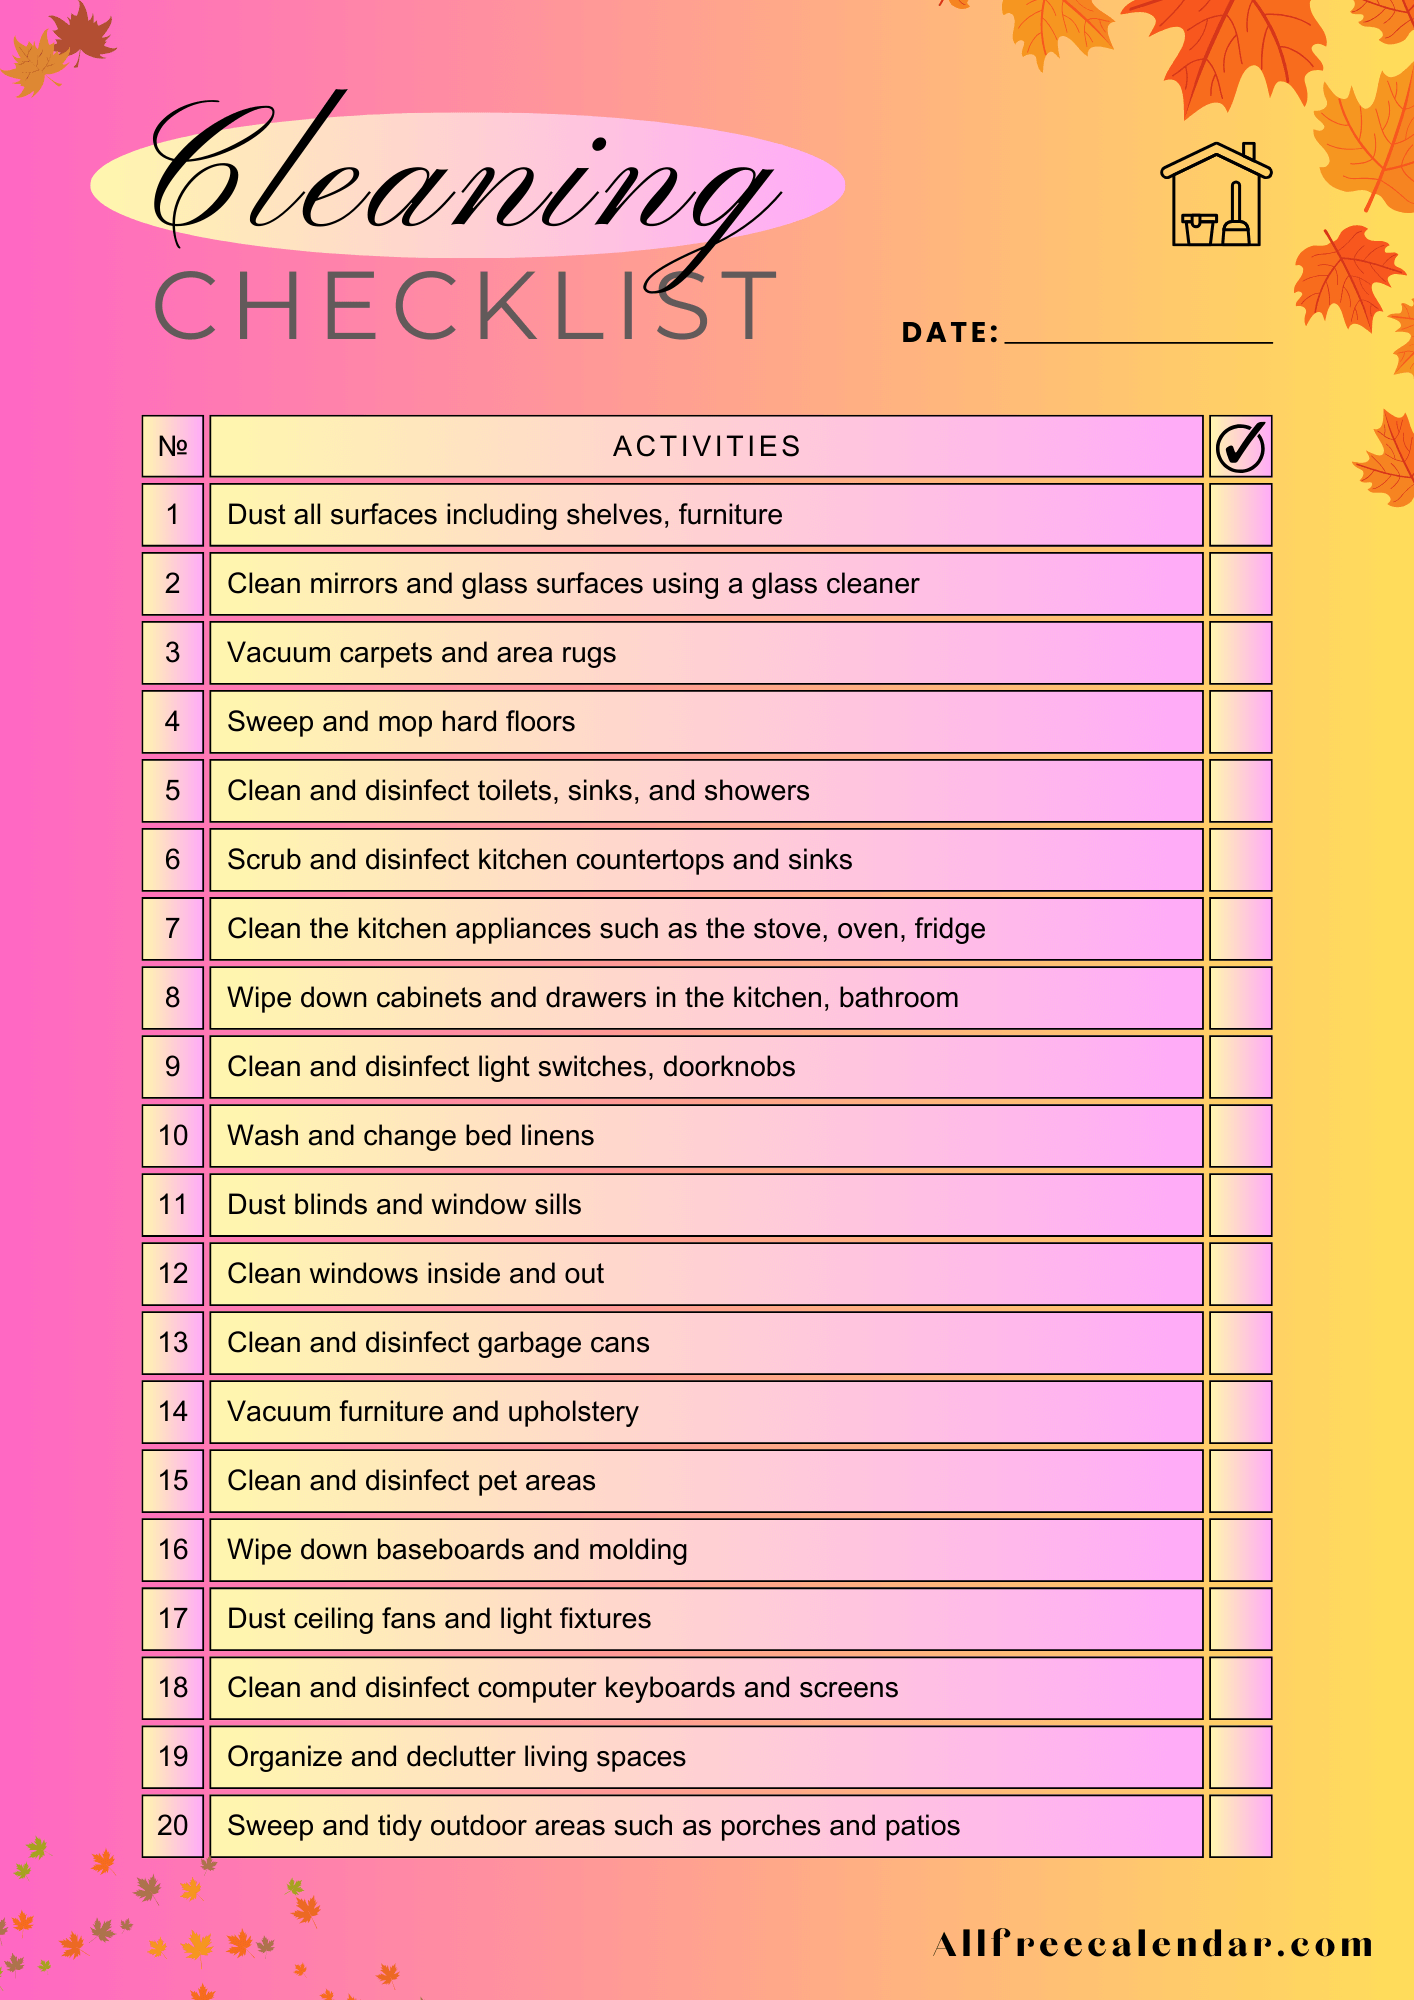 Autumn Professional Cleaning Checklist